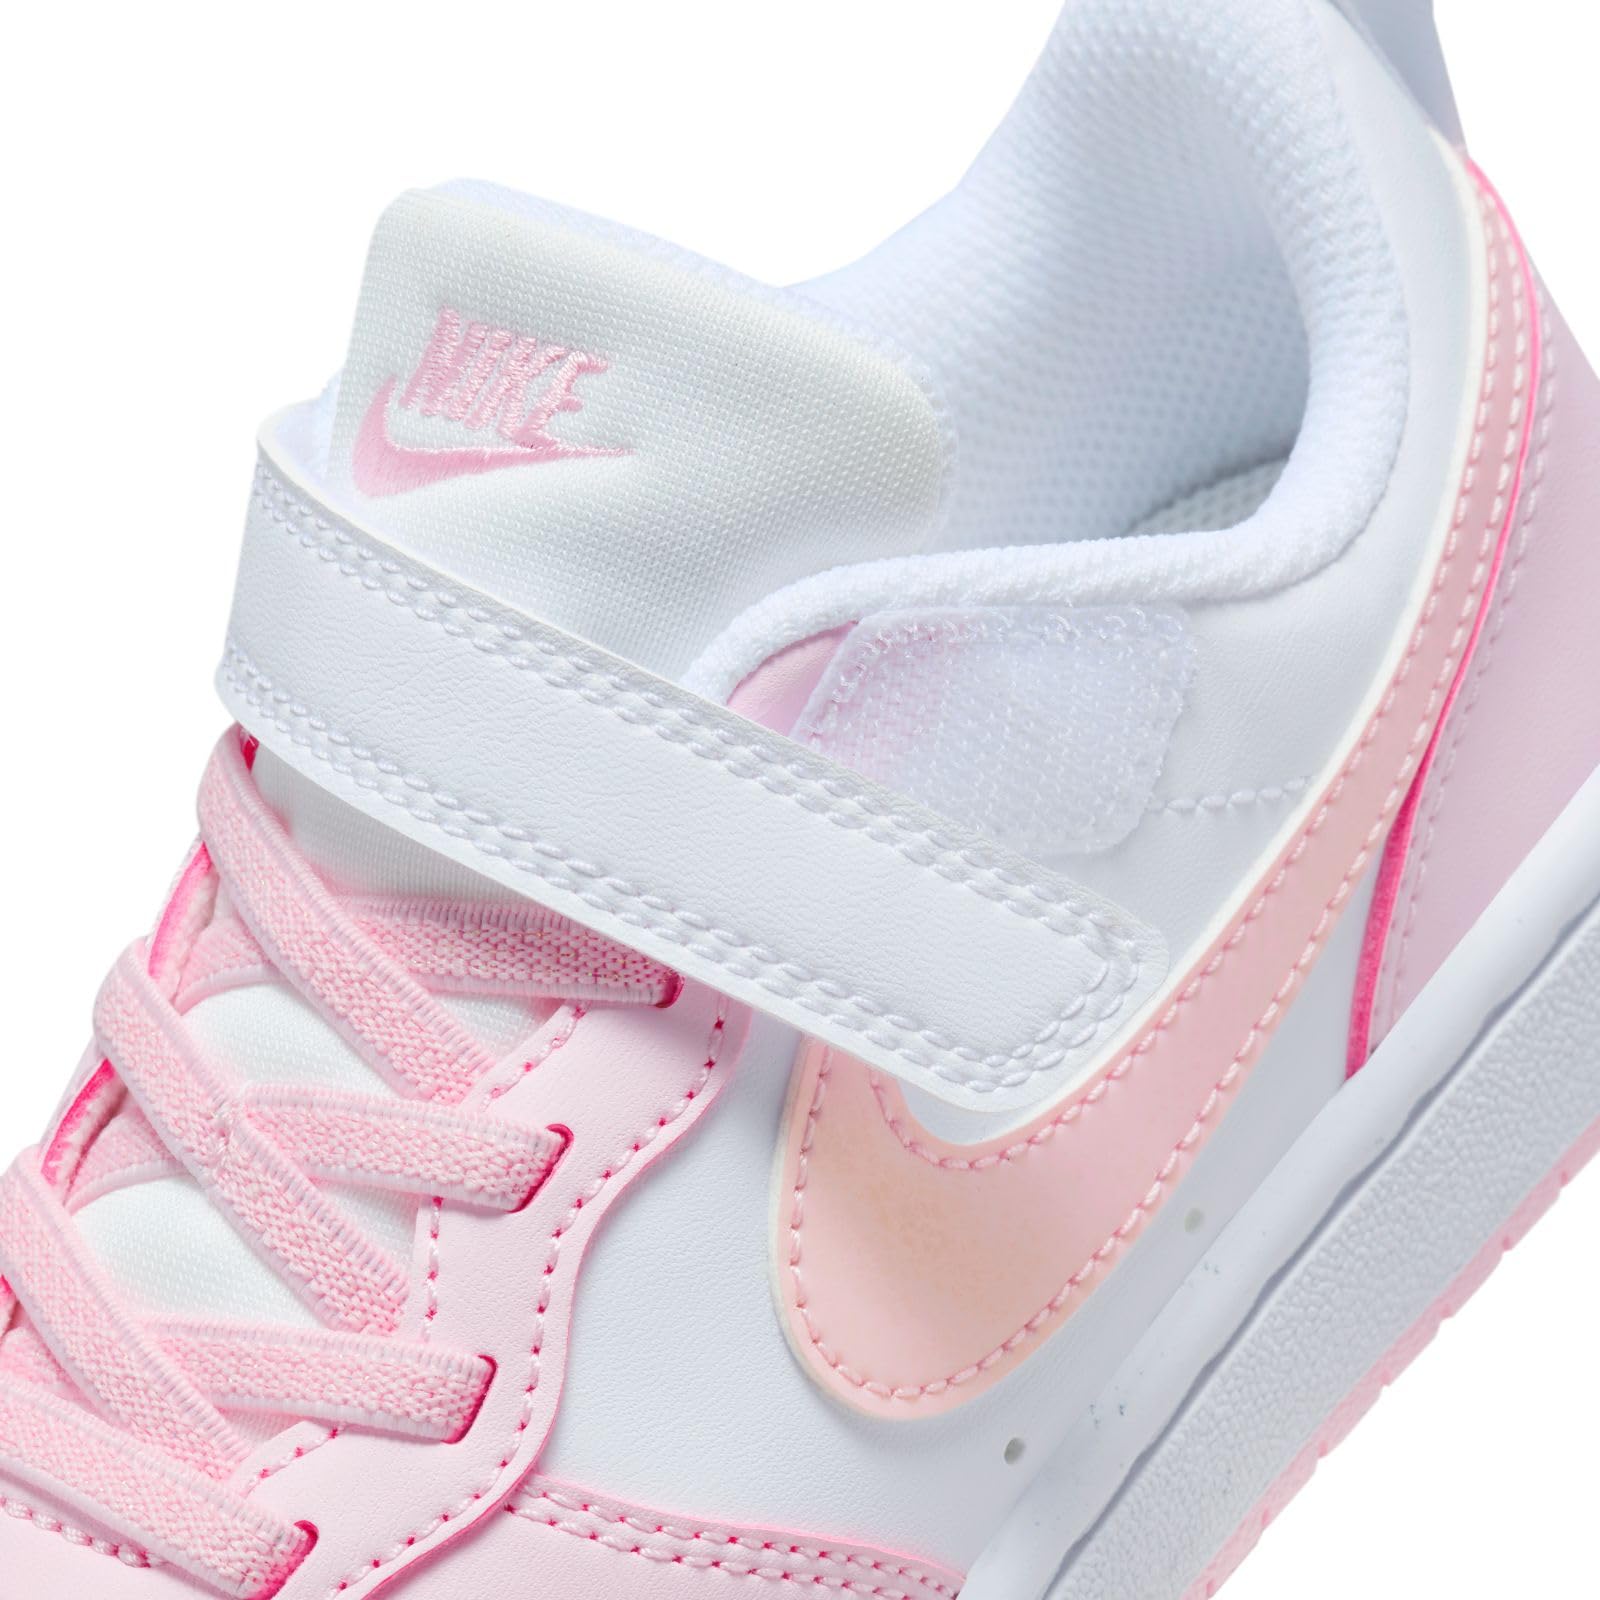 NIKE Court Borough Low Recraft Toddlers Shoes